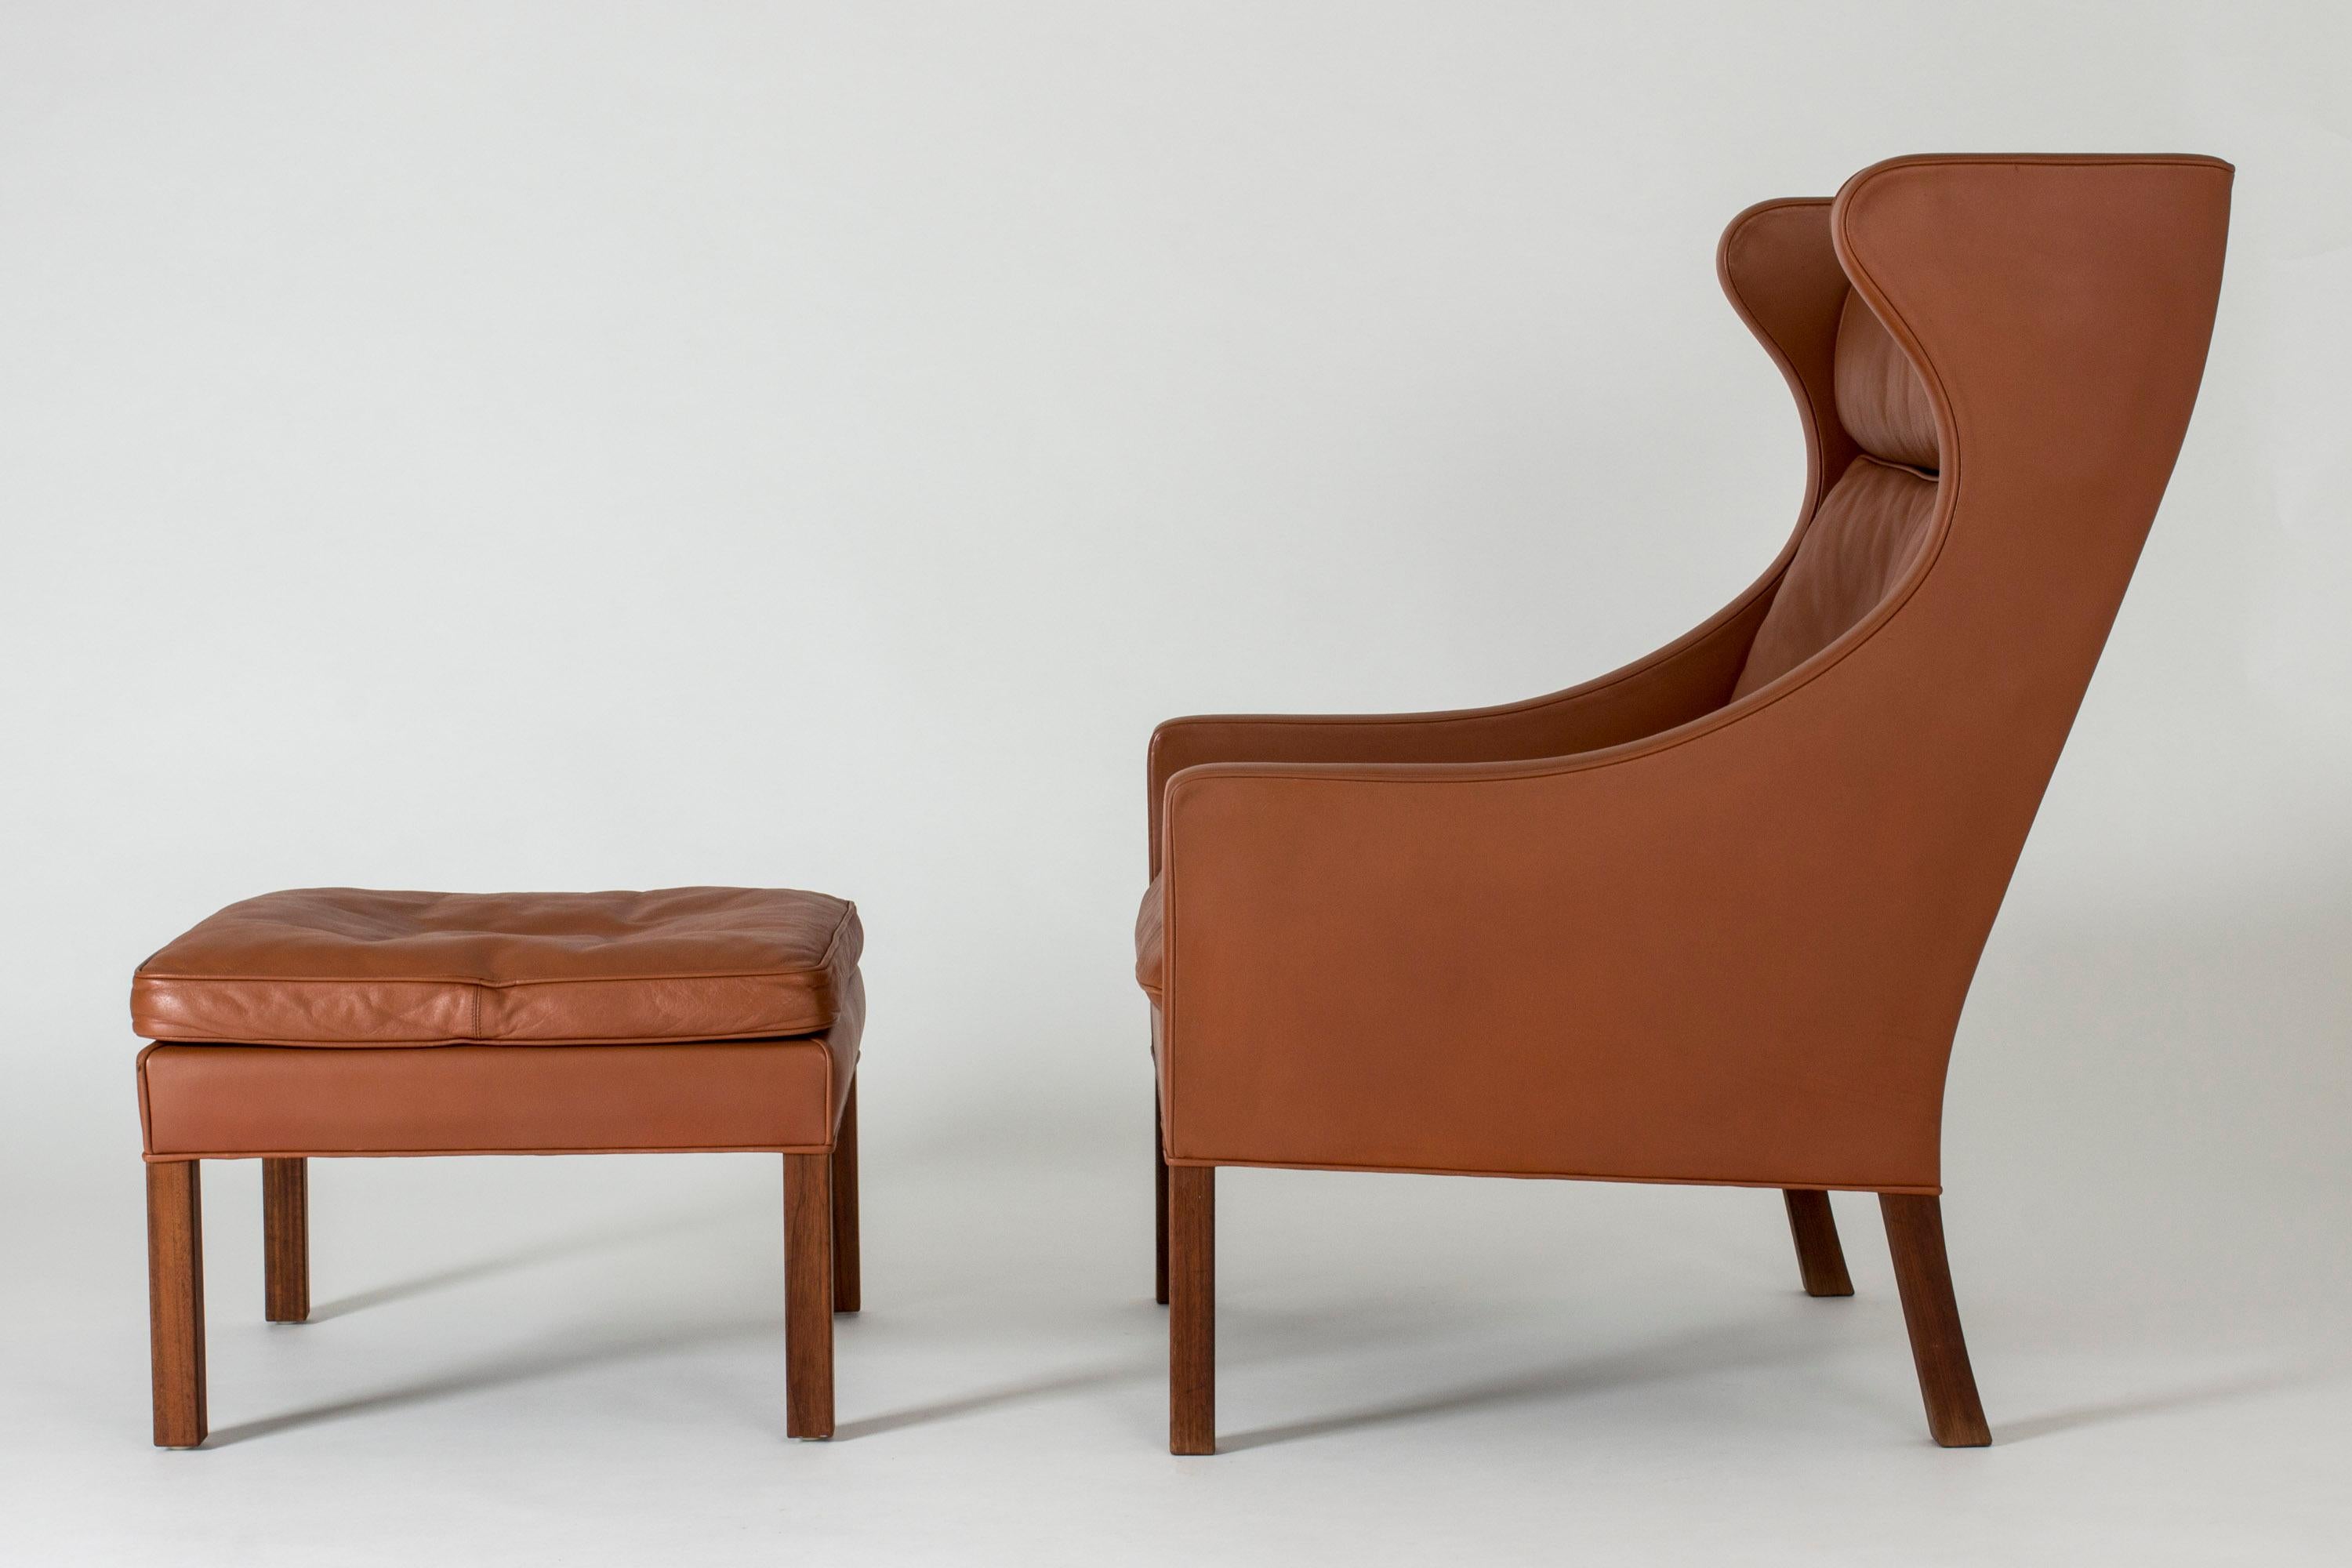 Lounge chair and ottoman by Børge Mogensen with elegant lines. Beautiful rust-colored leather in great condition.